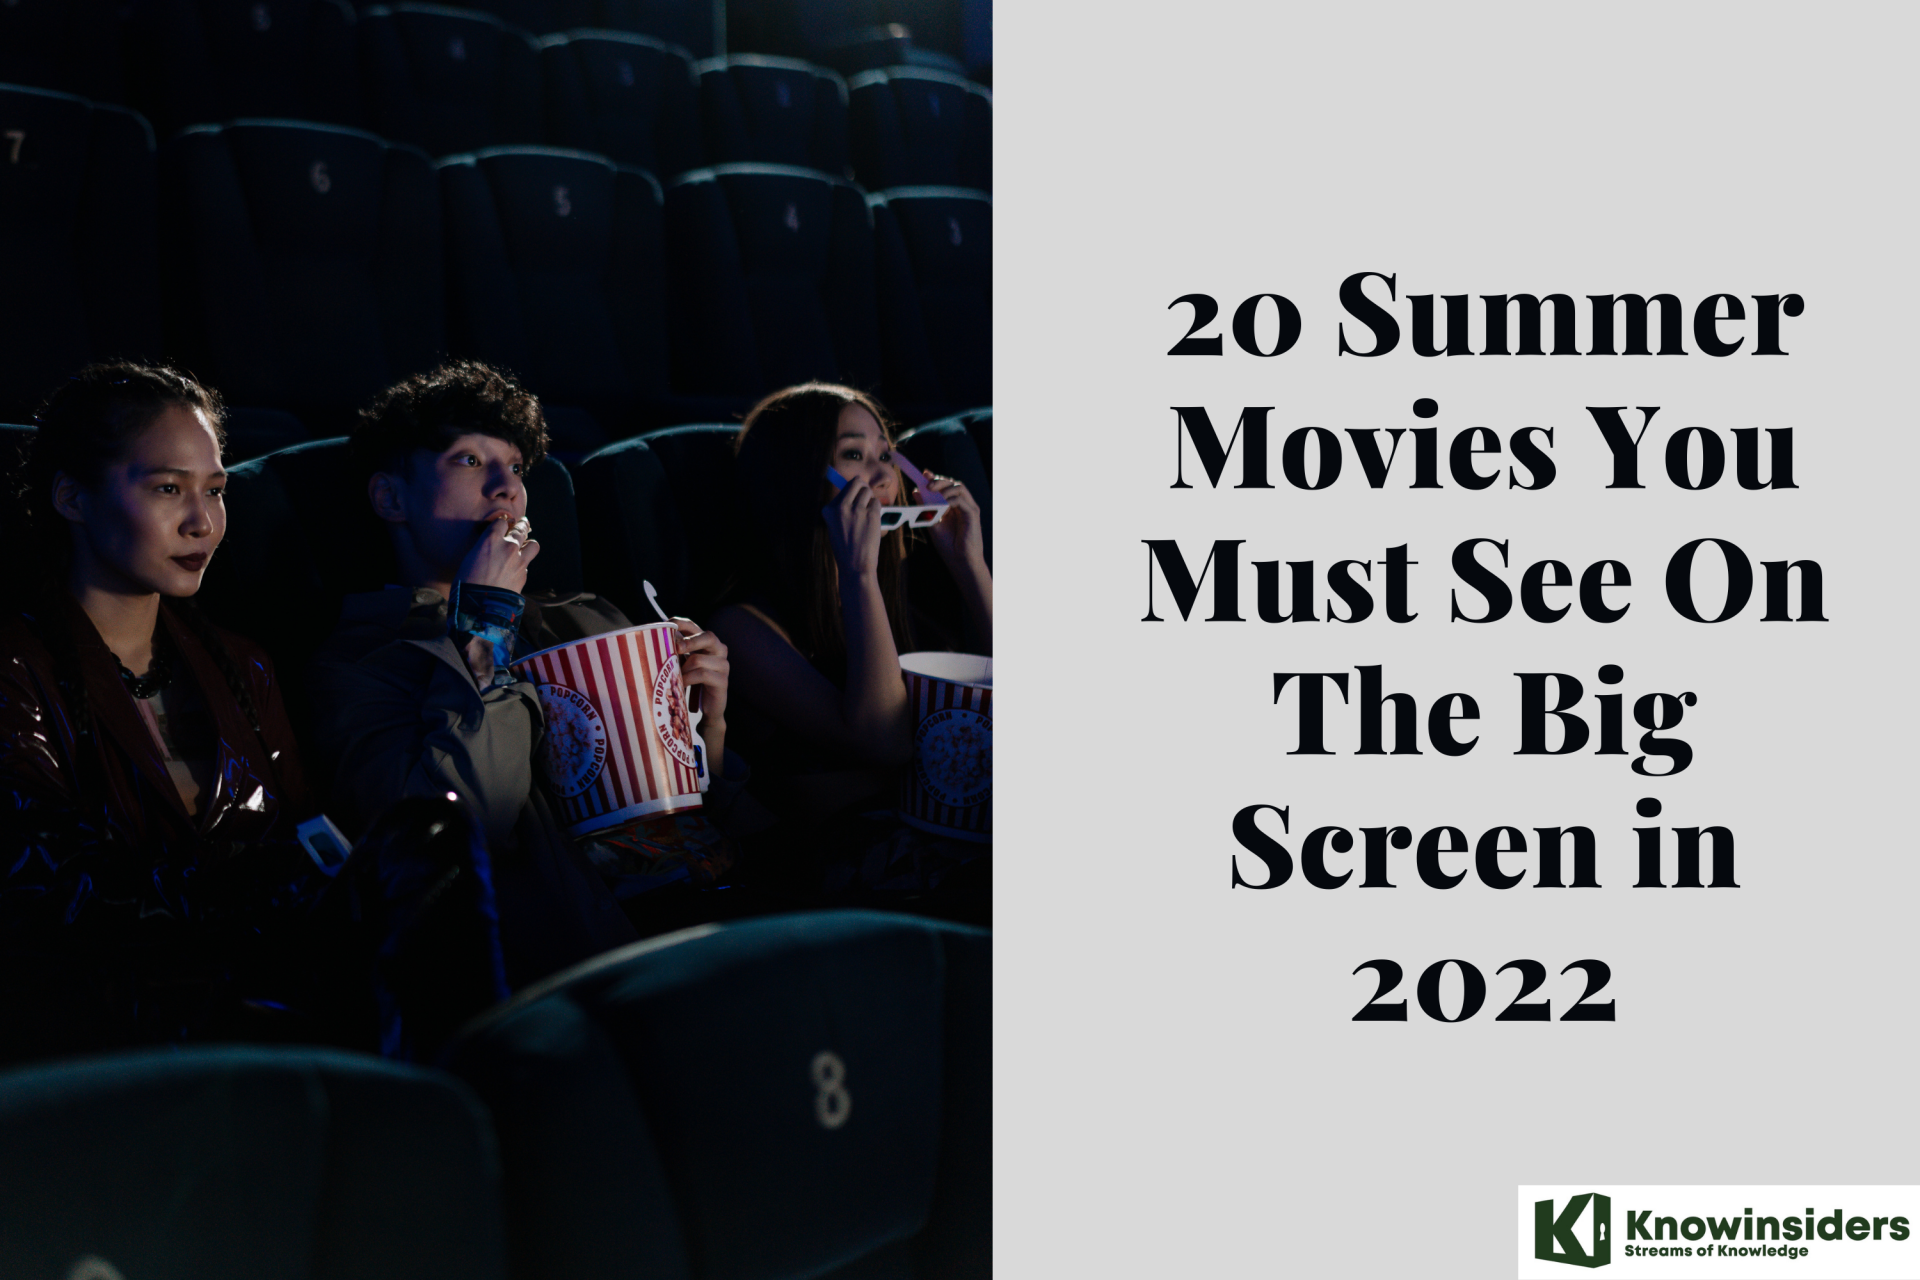 20 Summer Movies You Must See On The Big Screen in 2022